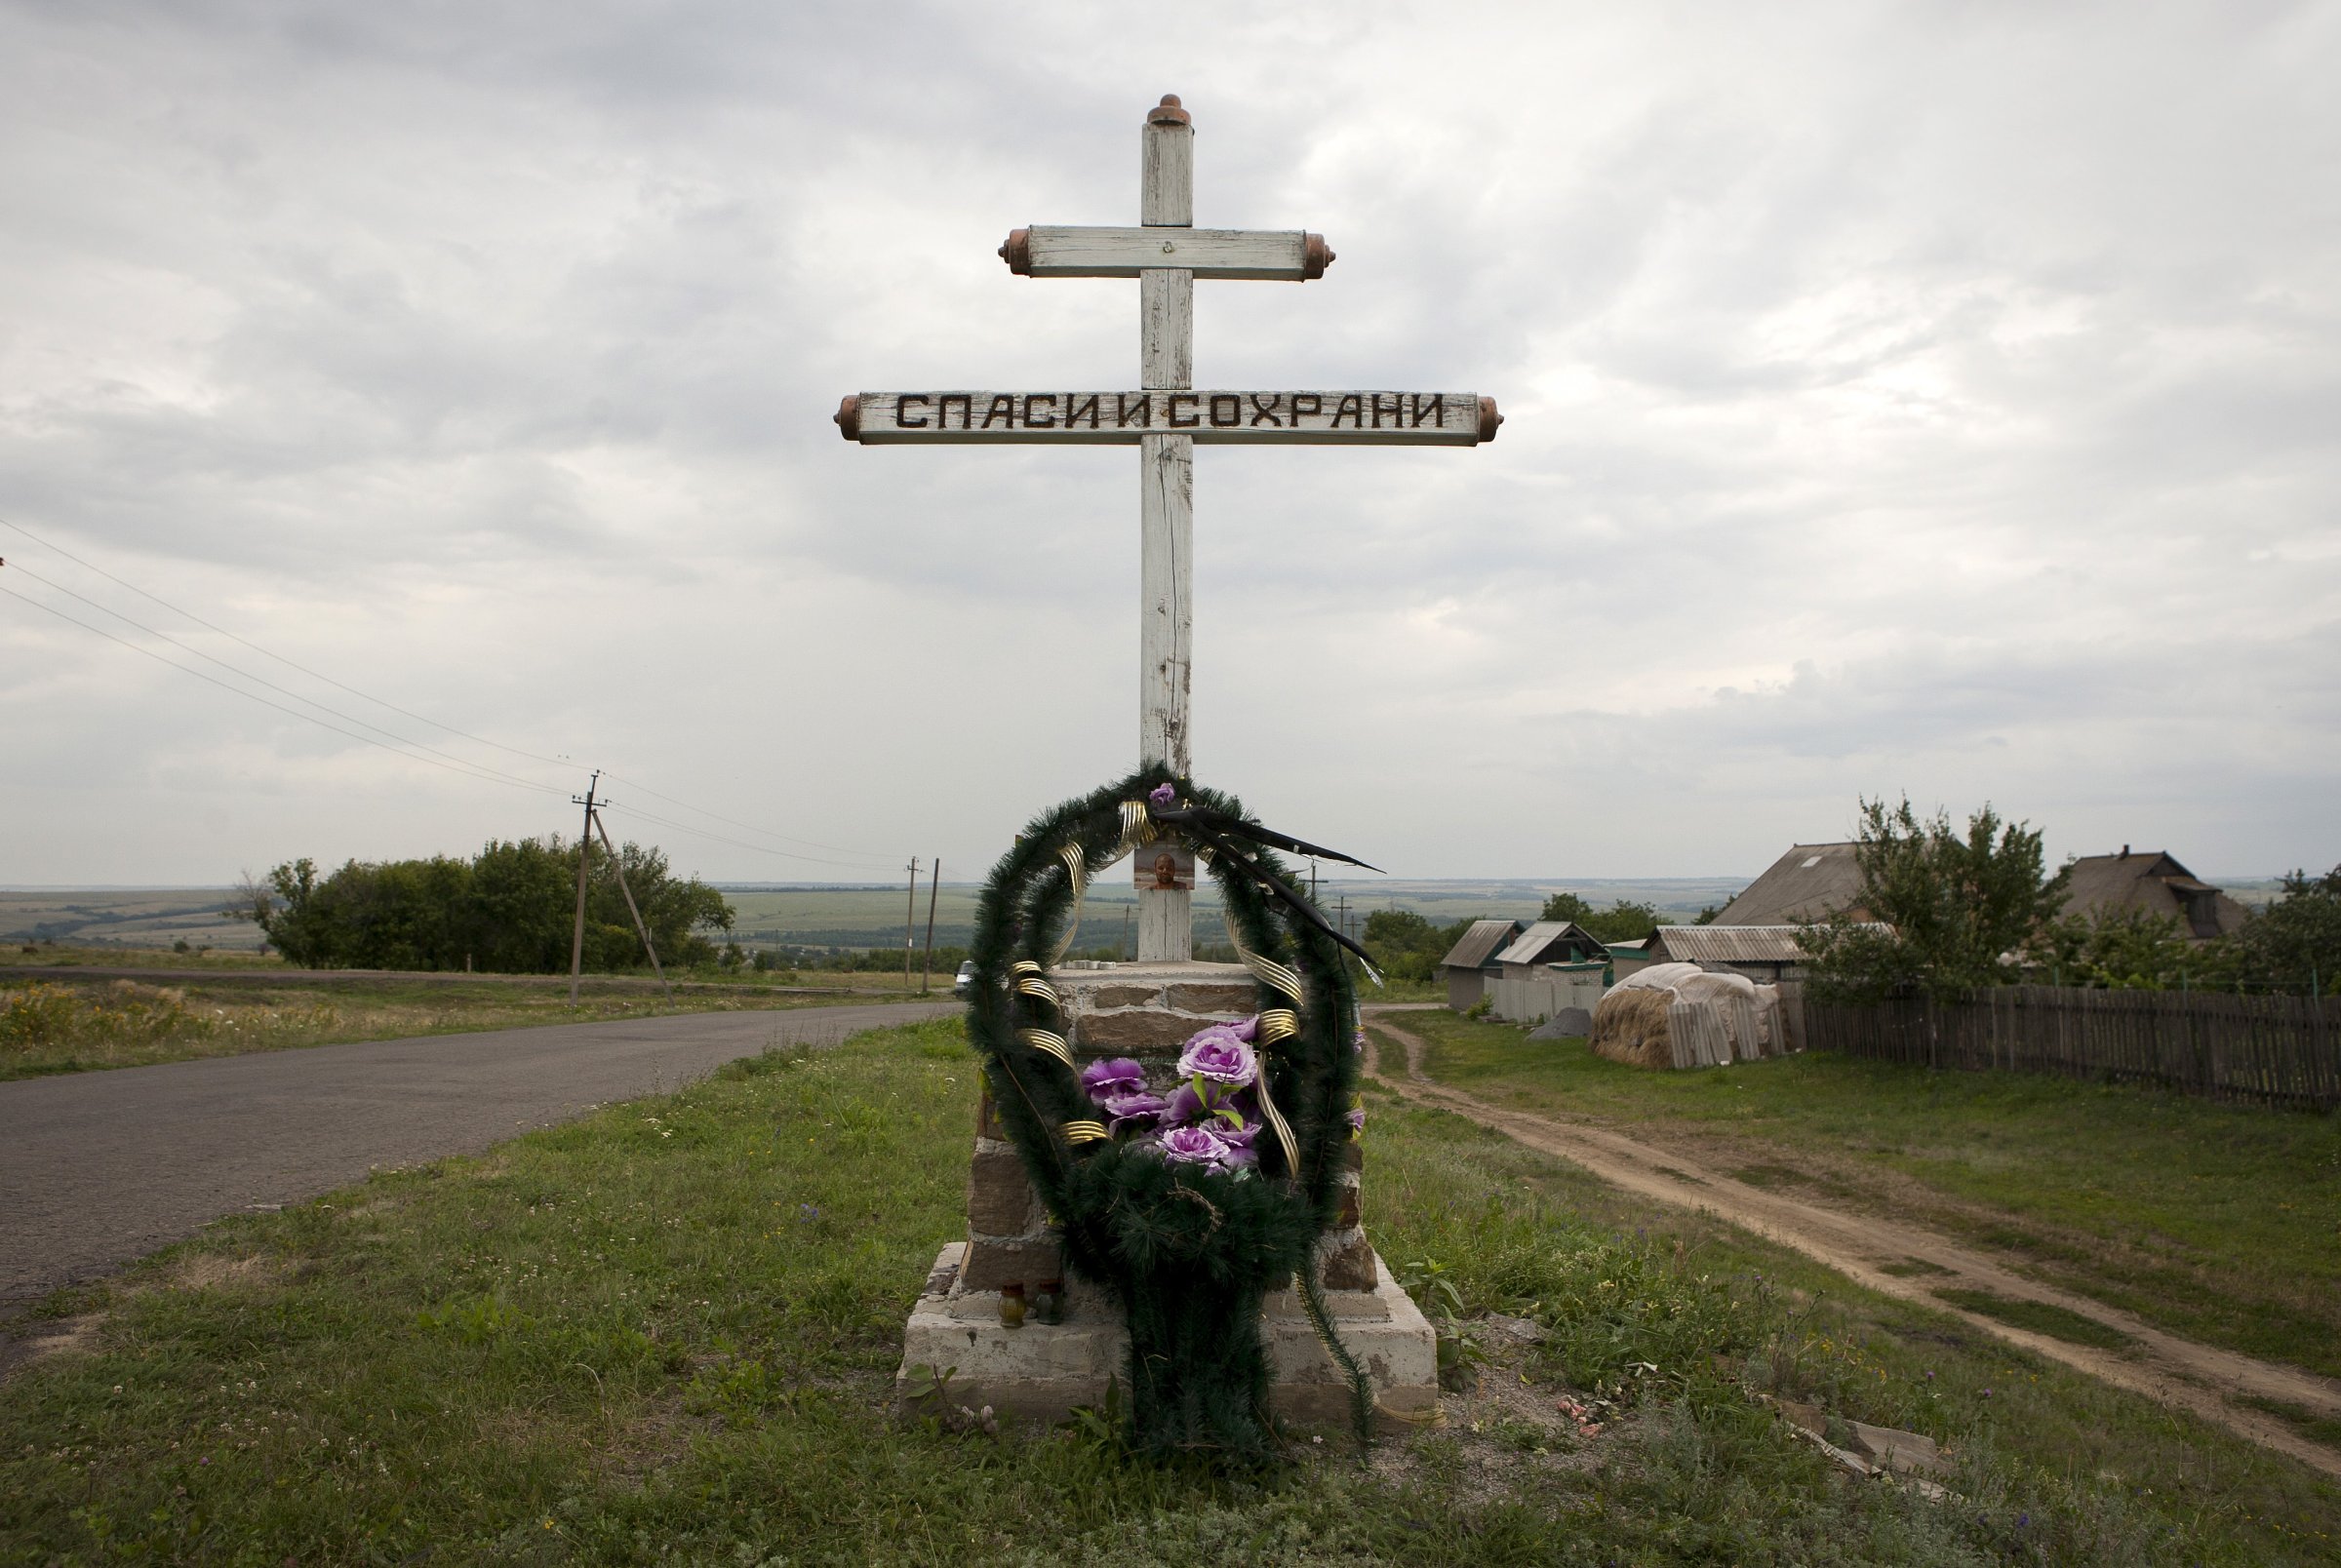 A wreath is placed on a cross with an inscription that reads "Save and protect" next to the site of the downed Malaysia Airlines flight MH17, near the village of Hrabove (Grabovo) in Donetsk region, eastern Ukraine